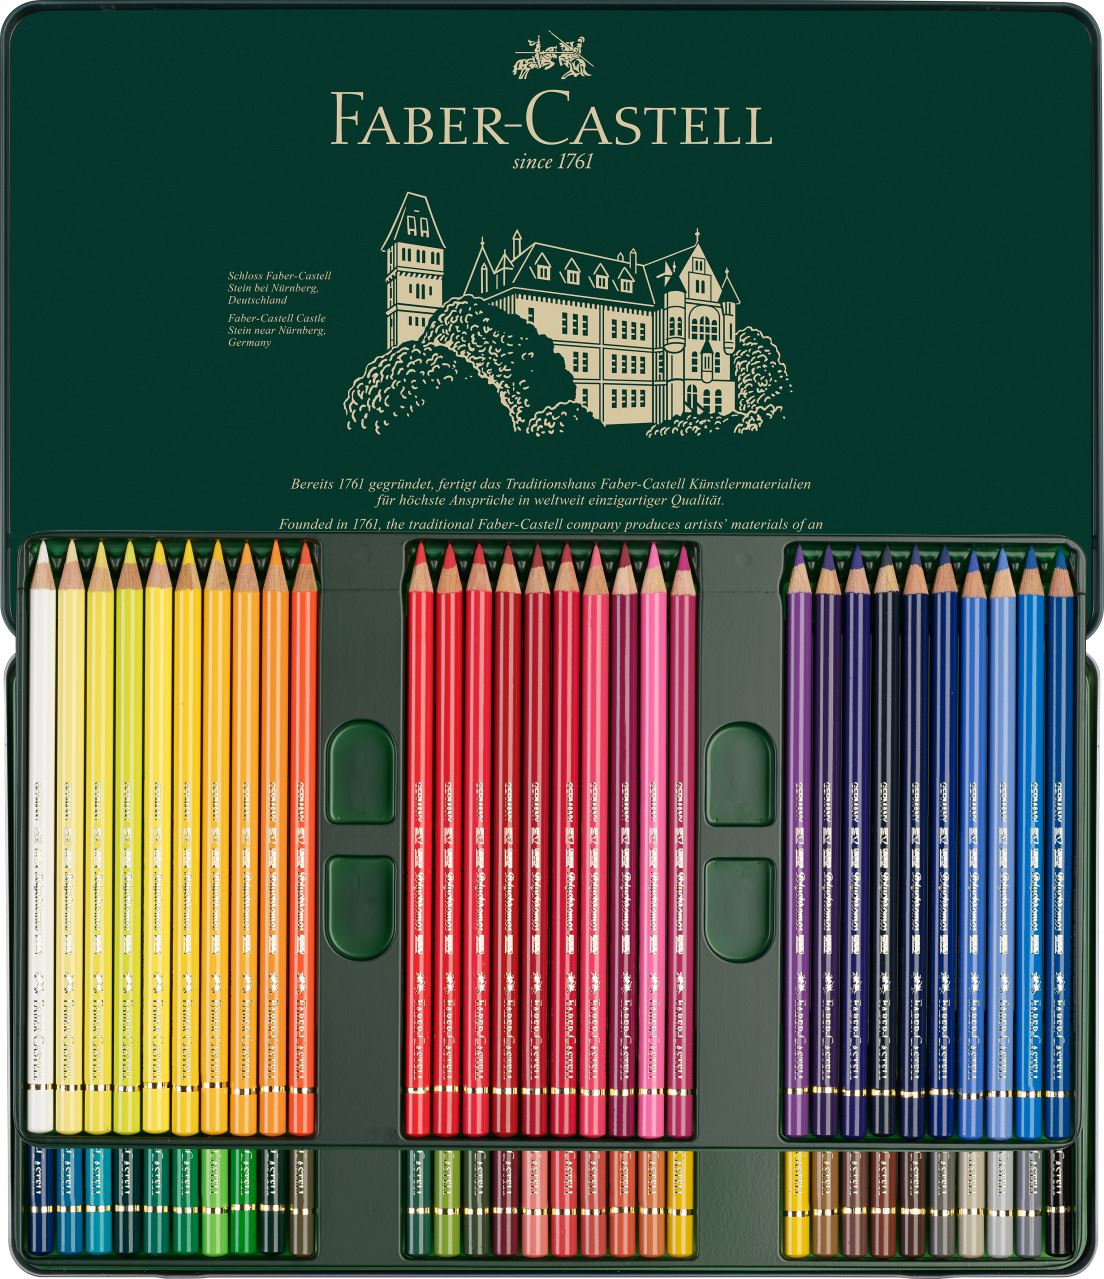 Faber-Castell 20 Faber-Castell Polychromos Artists' Colouring Pencils New 